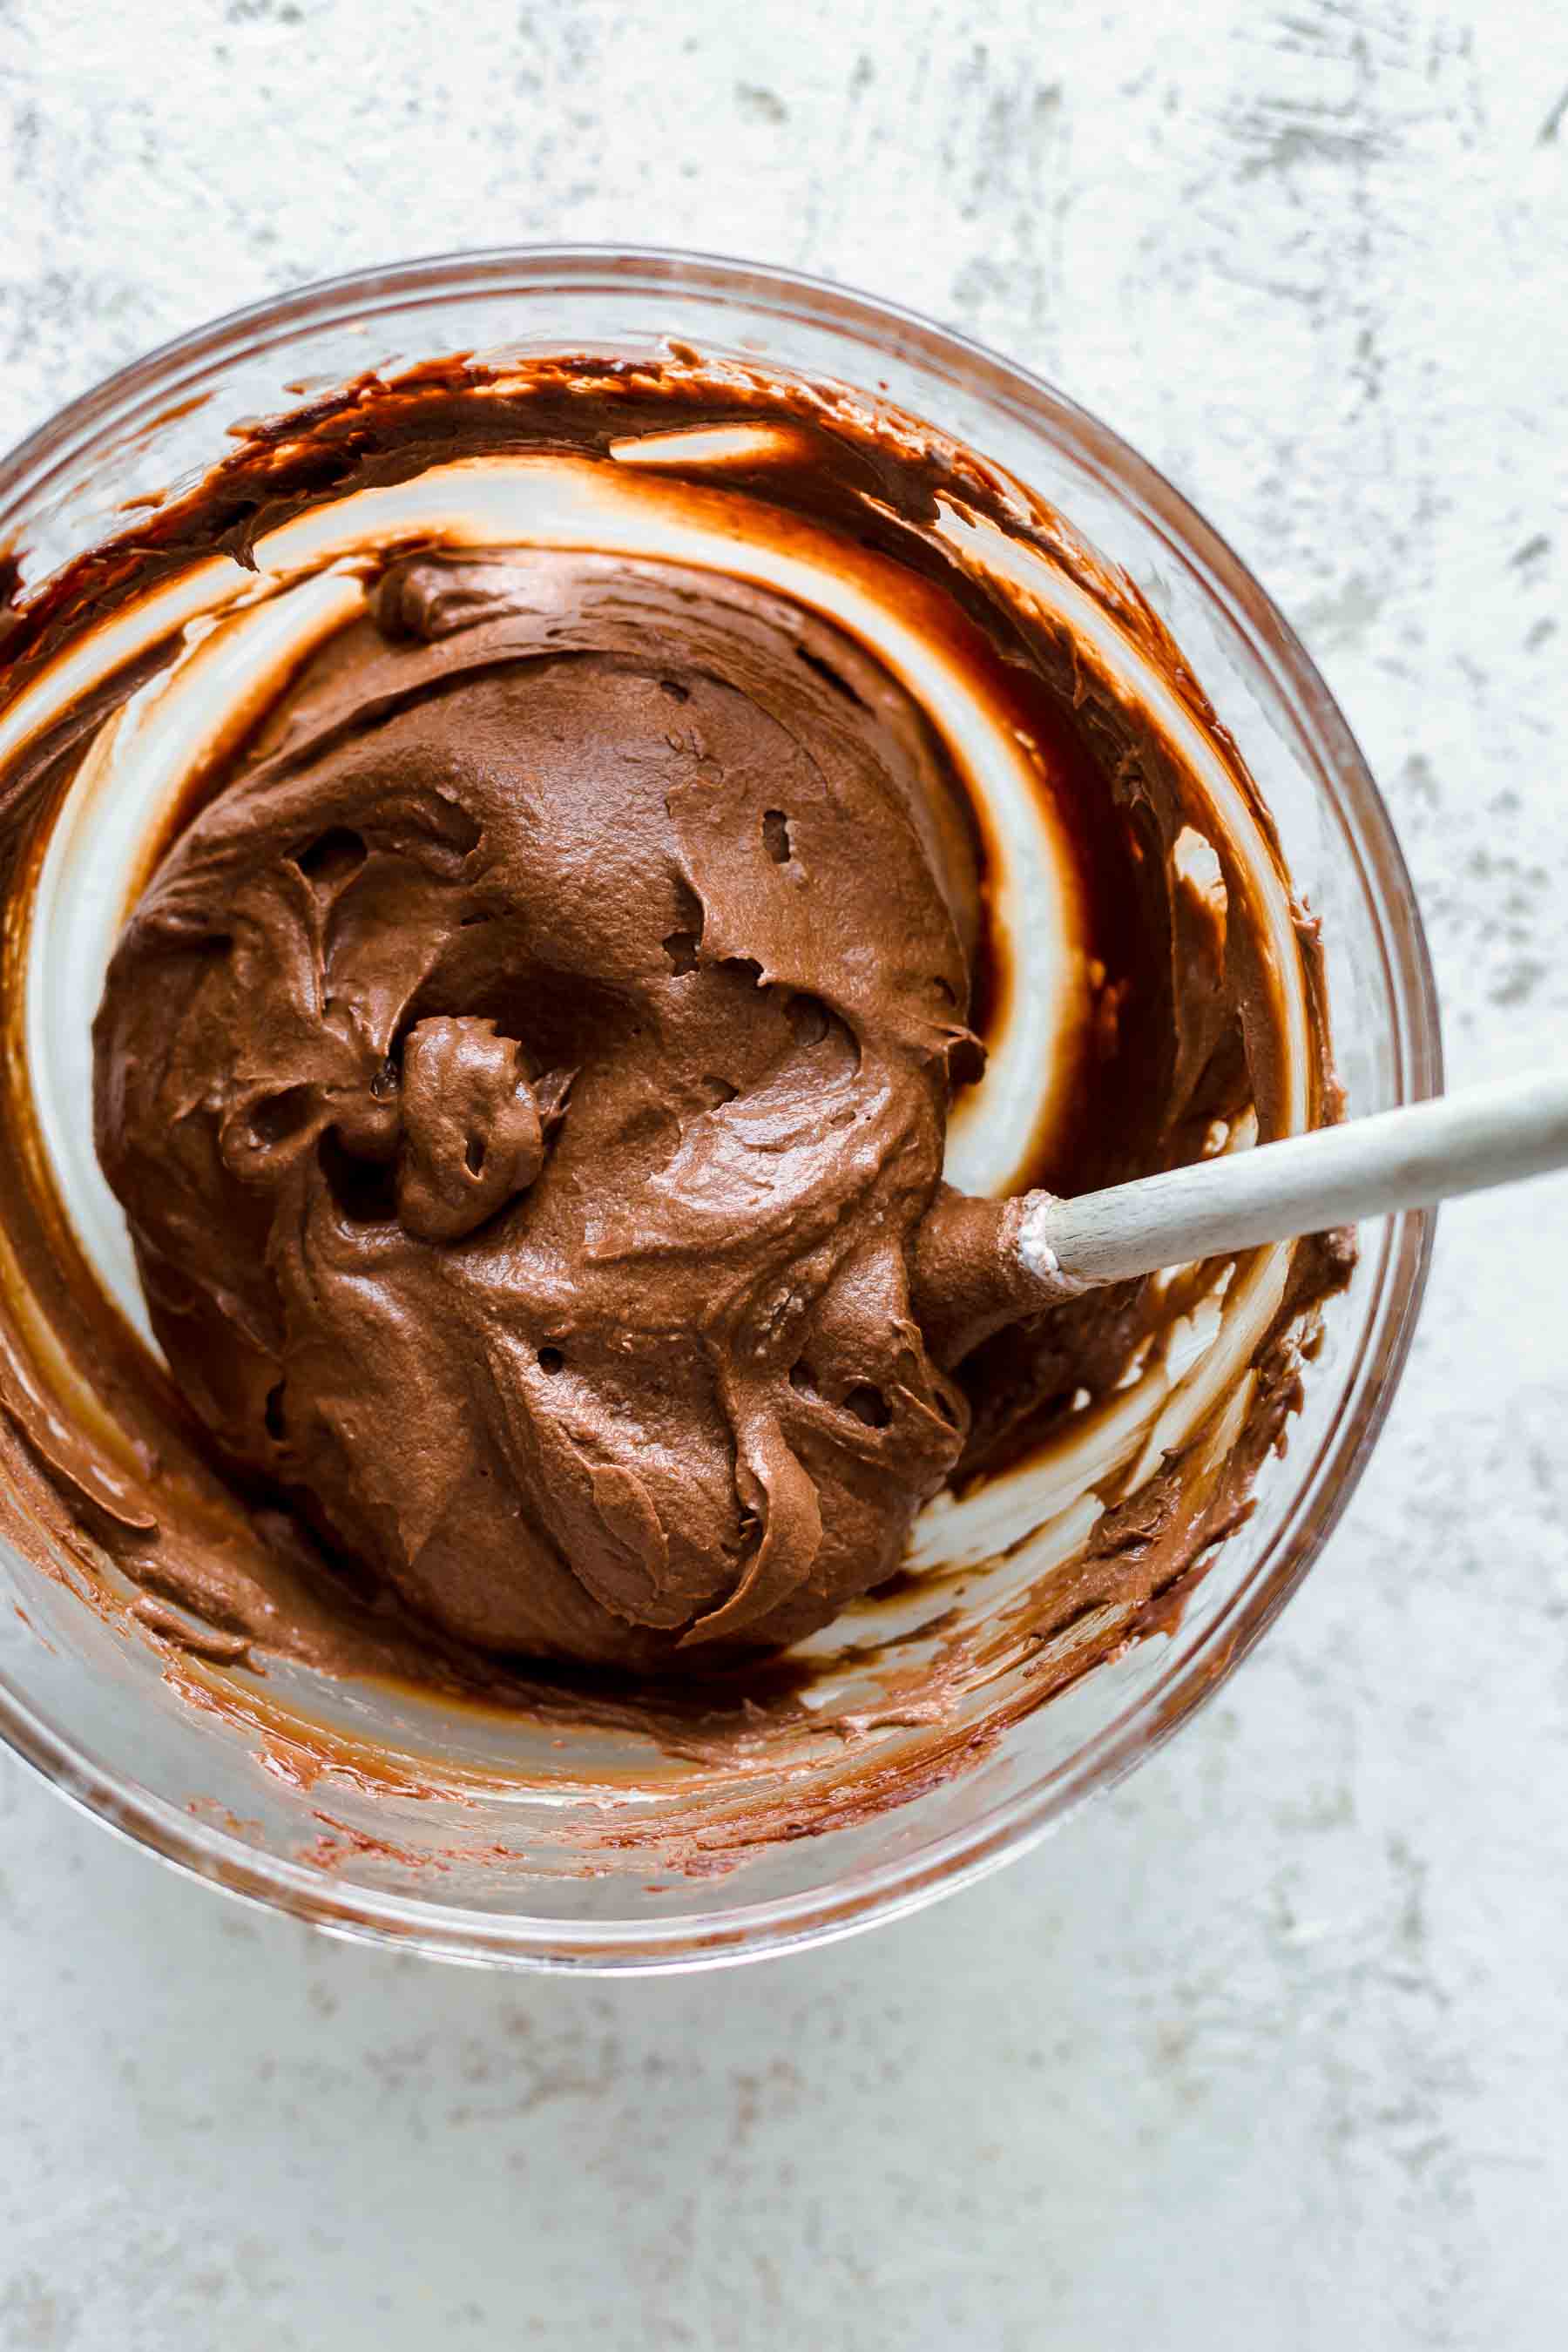 Chocolate mousse in mixing bowl with wooden spoon